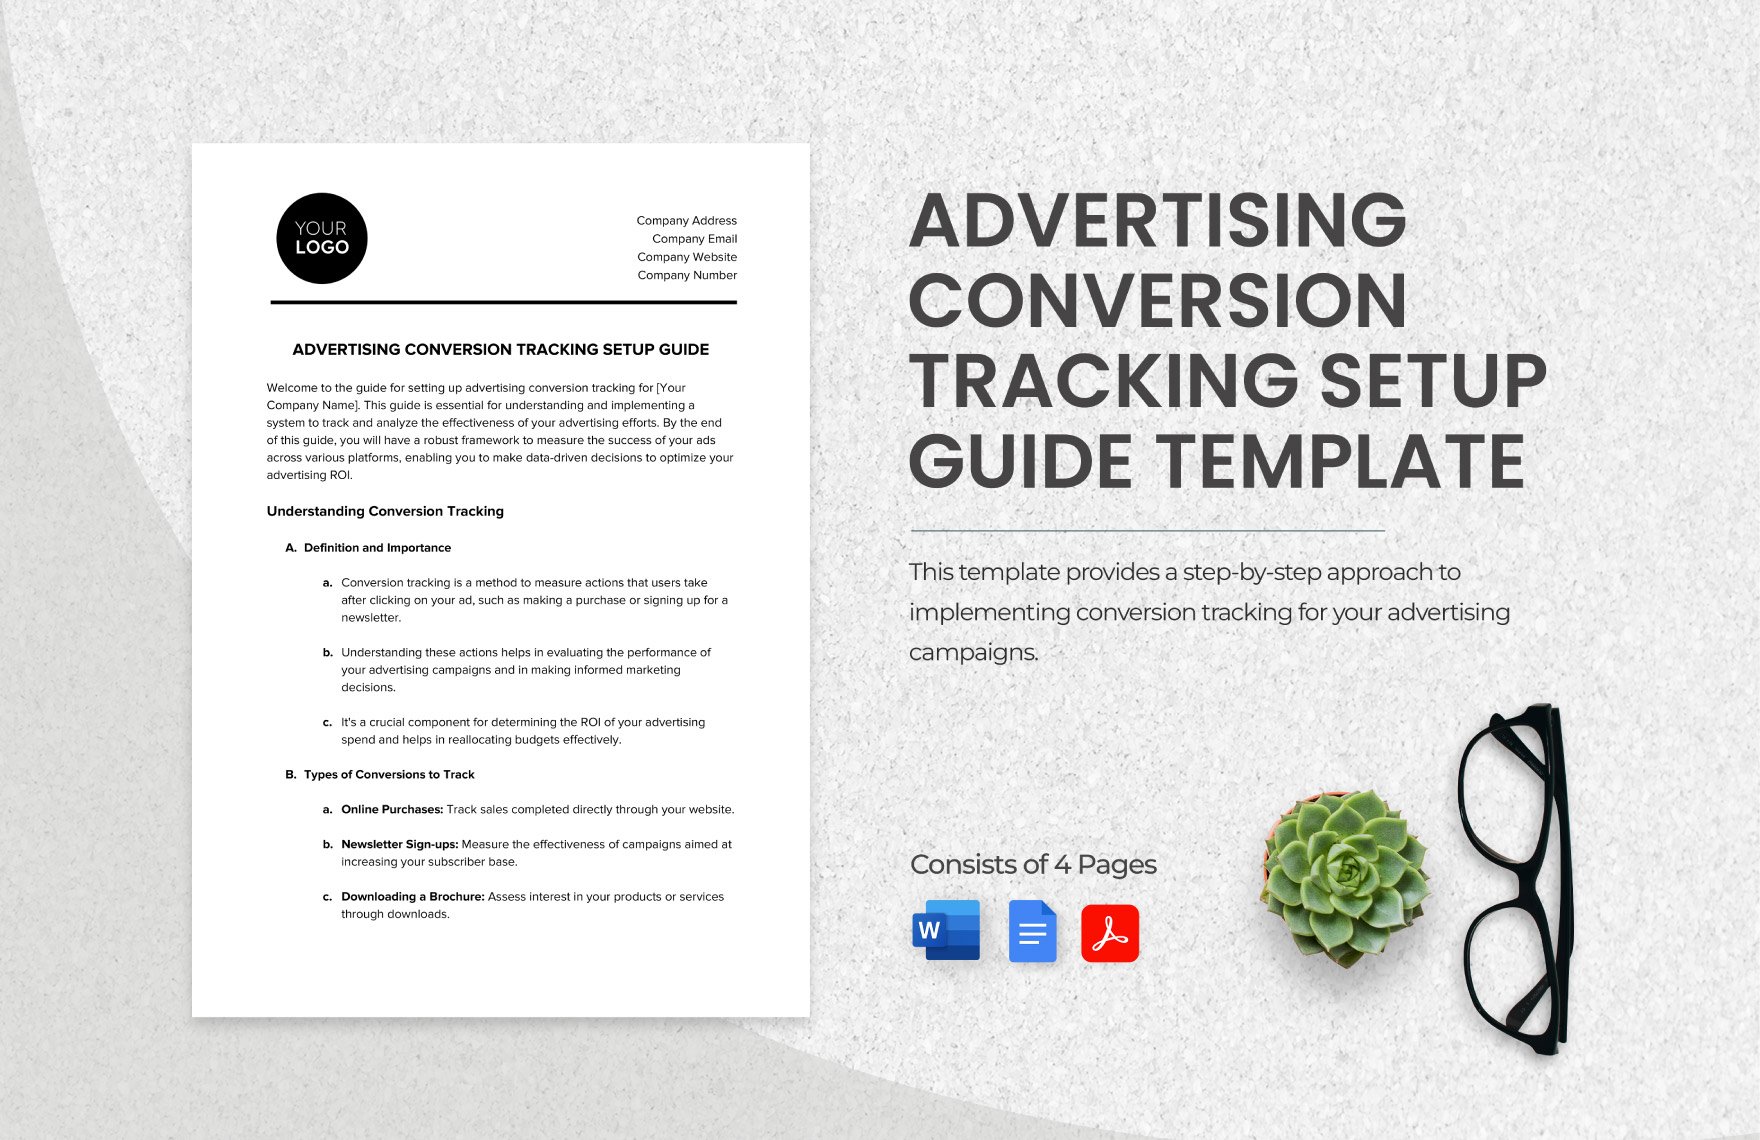 Advertising Conversion Tracking Setup Guide Template in Word, Google Docs, PDF